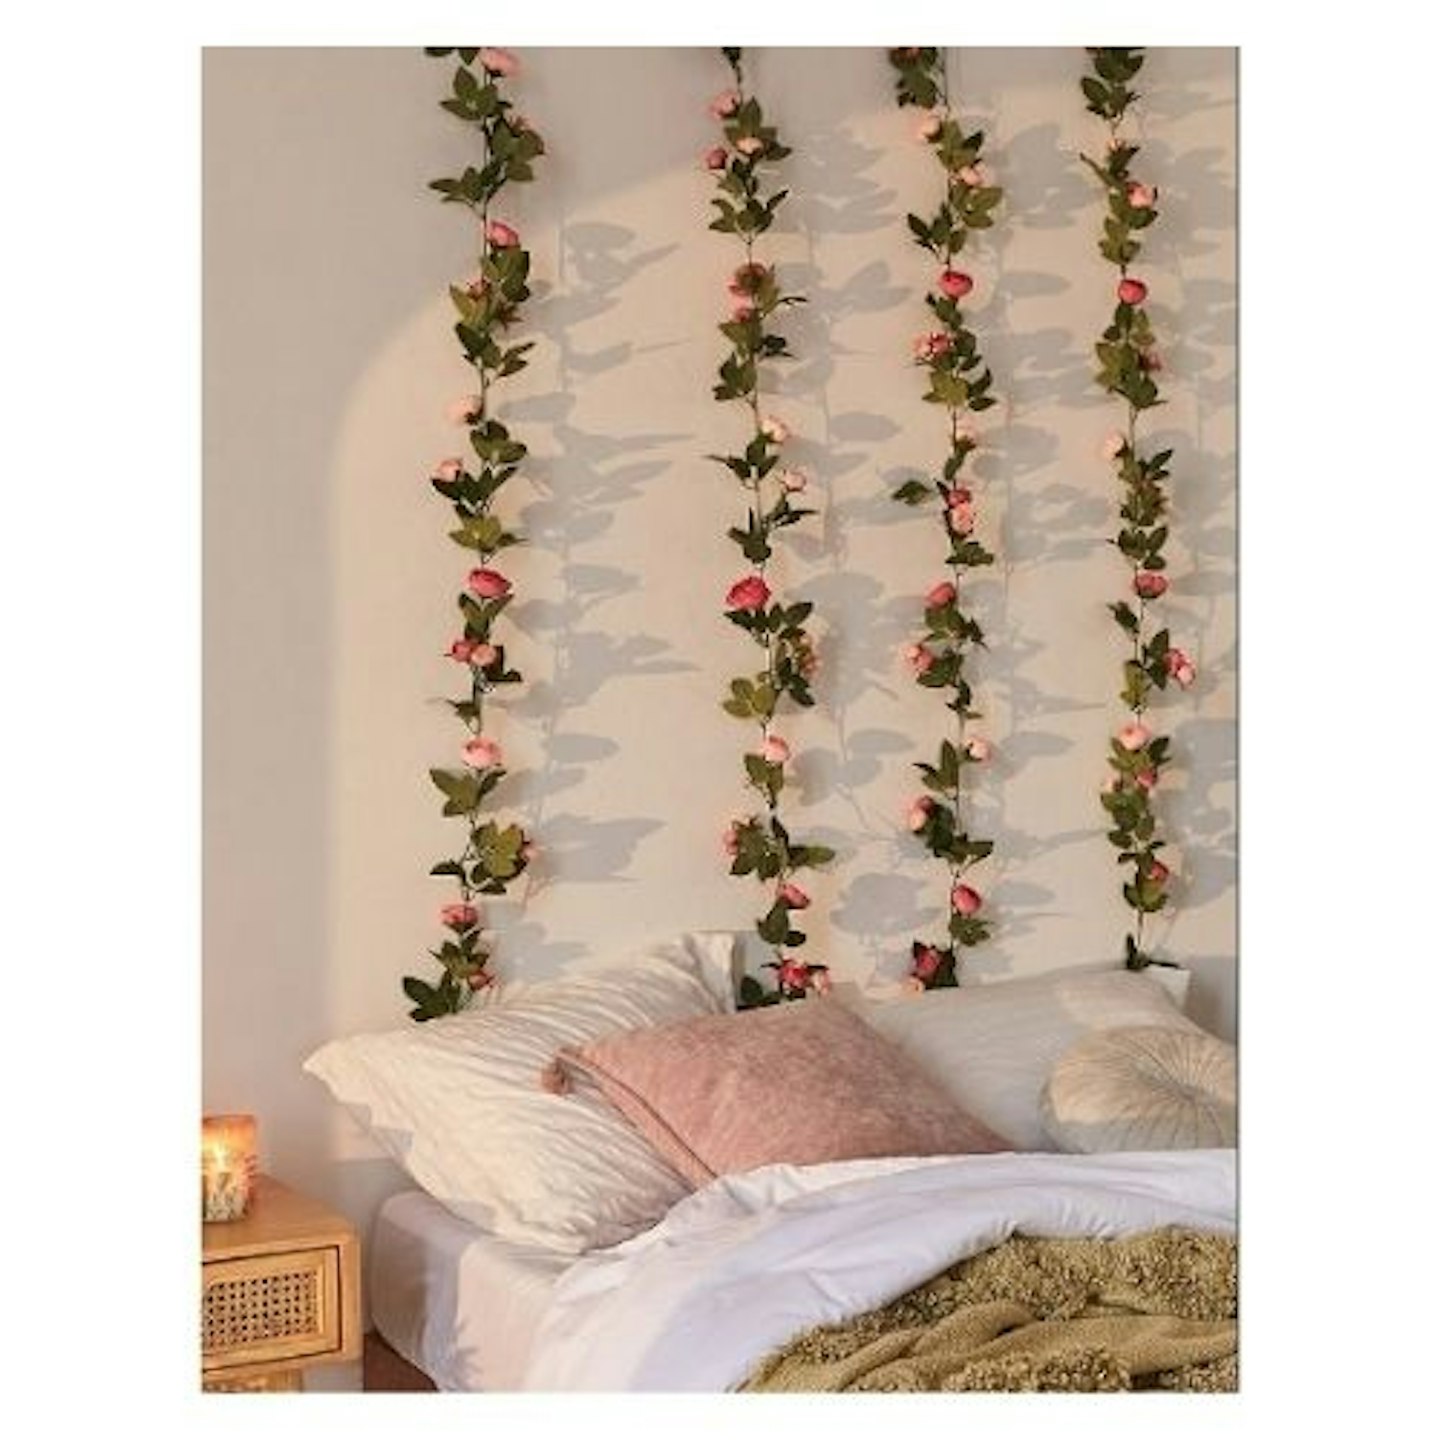 Decorative Pink Rose Vine Garland on a bedroom wall